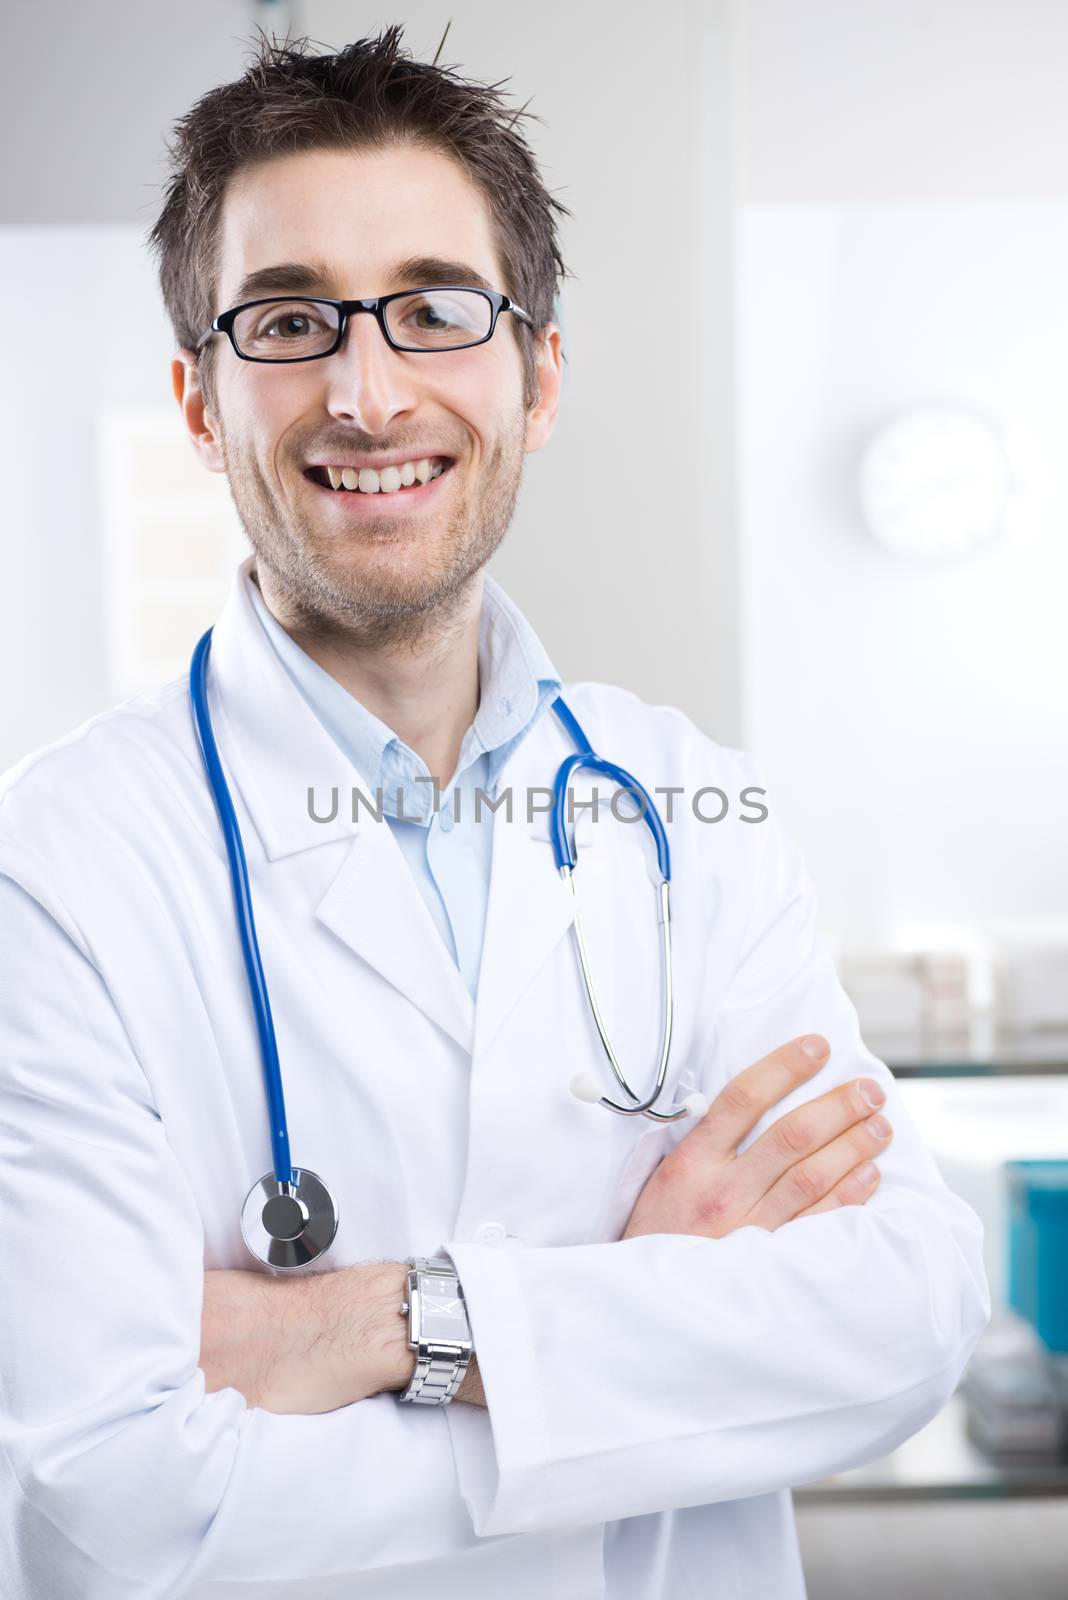 Young professional doctor at hospital with crossed arms